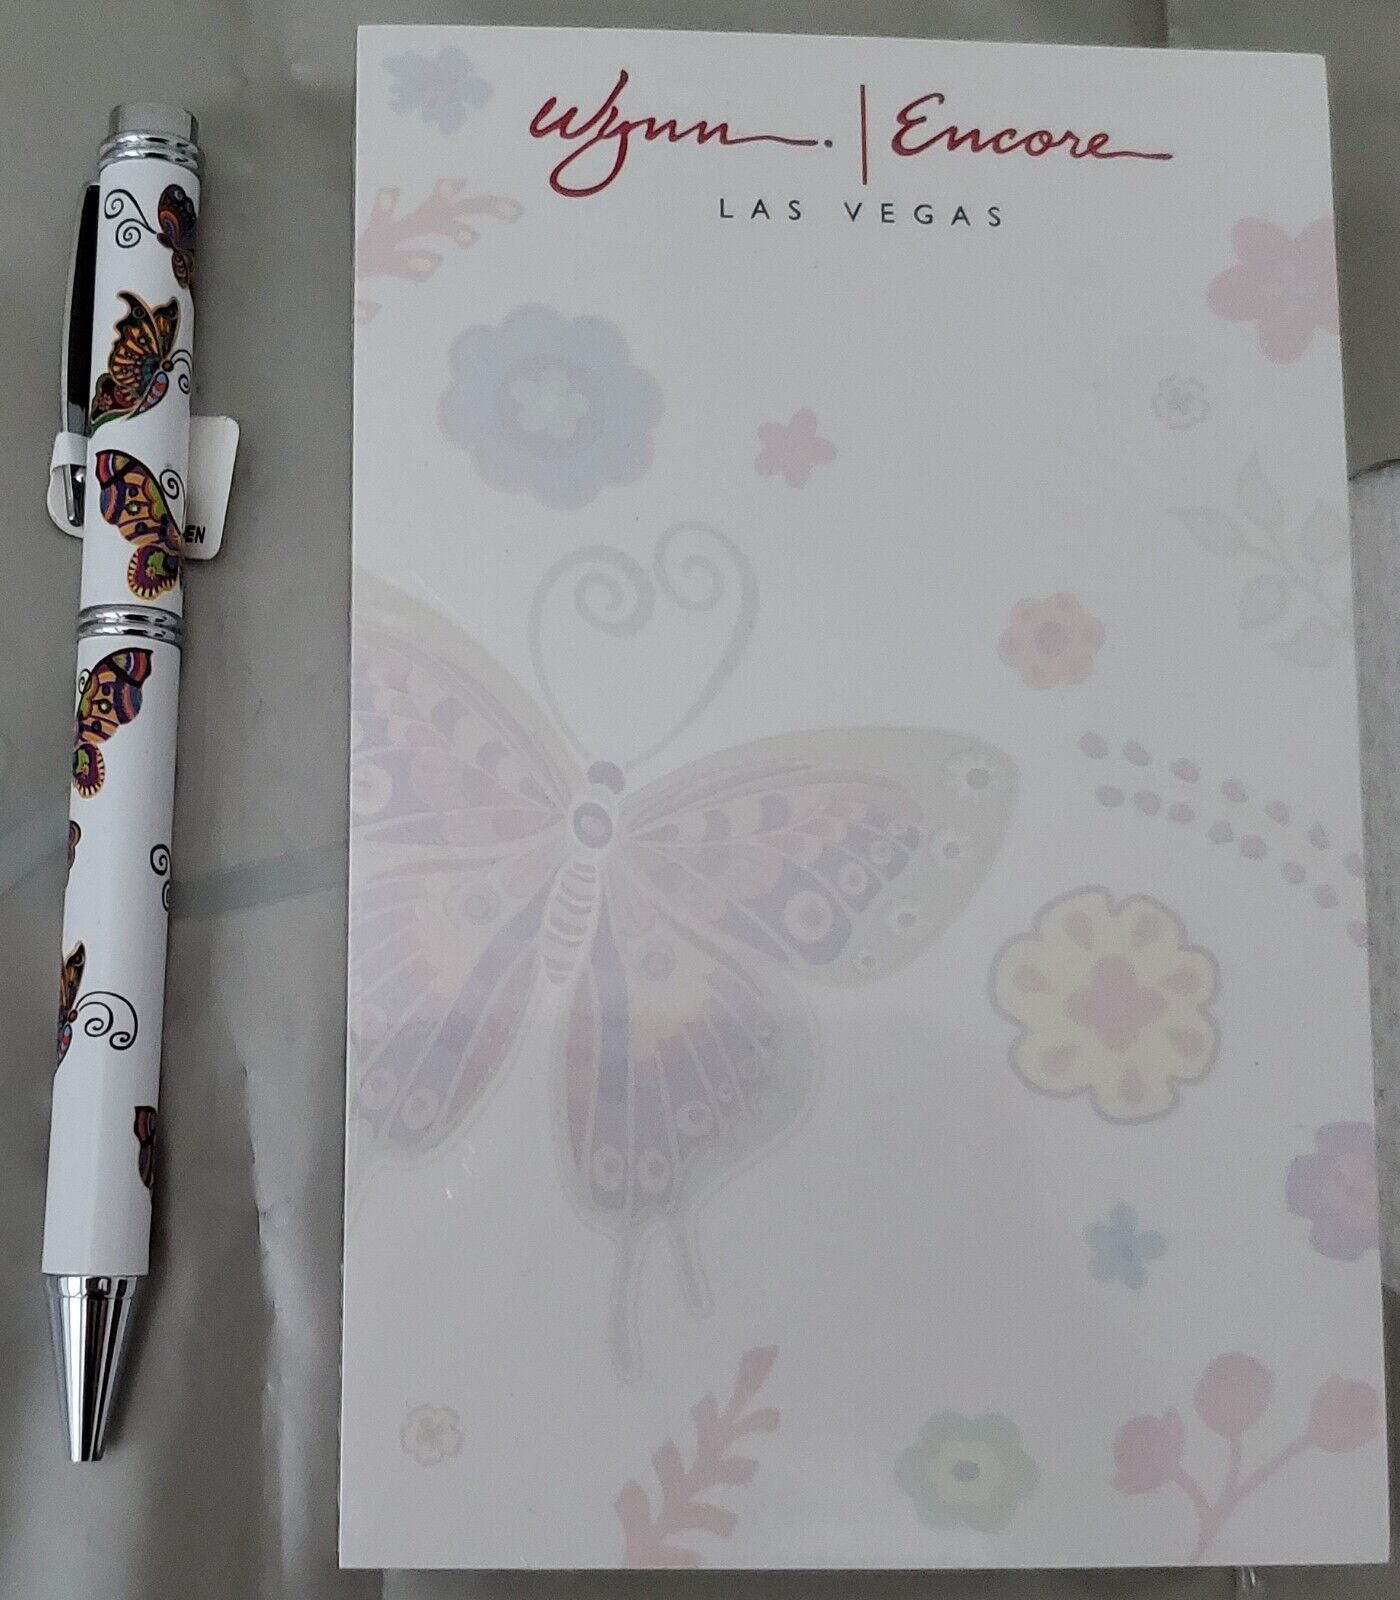 NEW Encore at Wynn Las Vegas - Butterfly Design Pen and Sealed Notepad